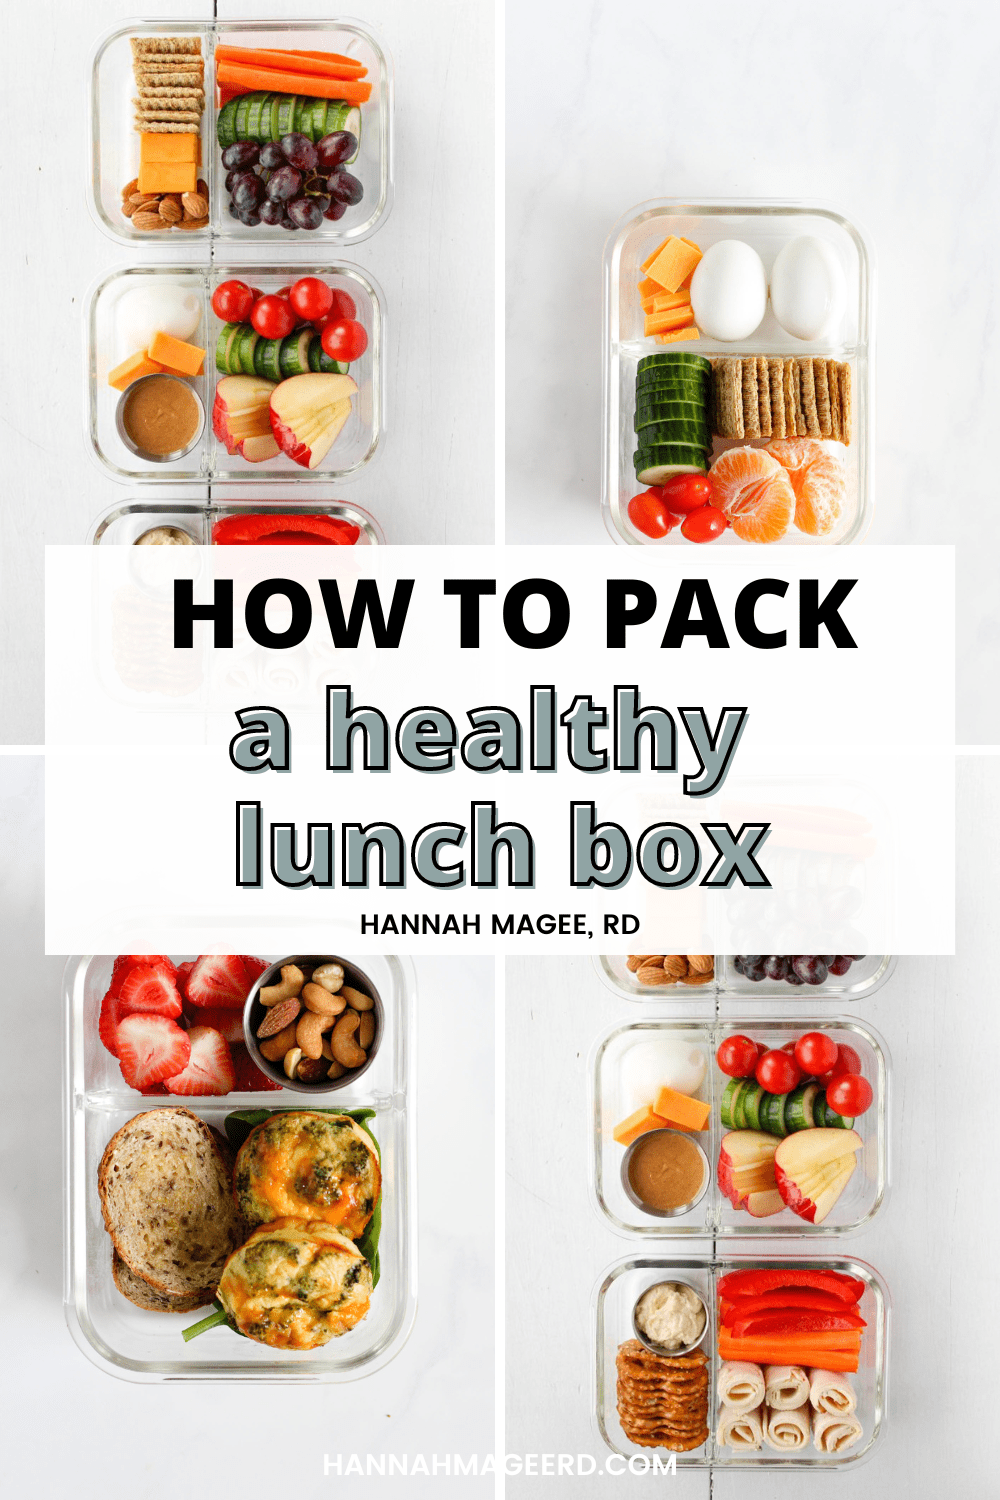 How to Pack a Healthy Lunch BoxThat Your Kid Will Actually Eat